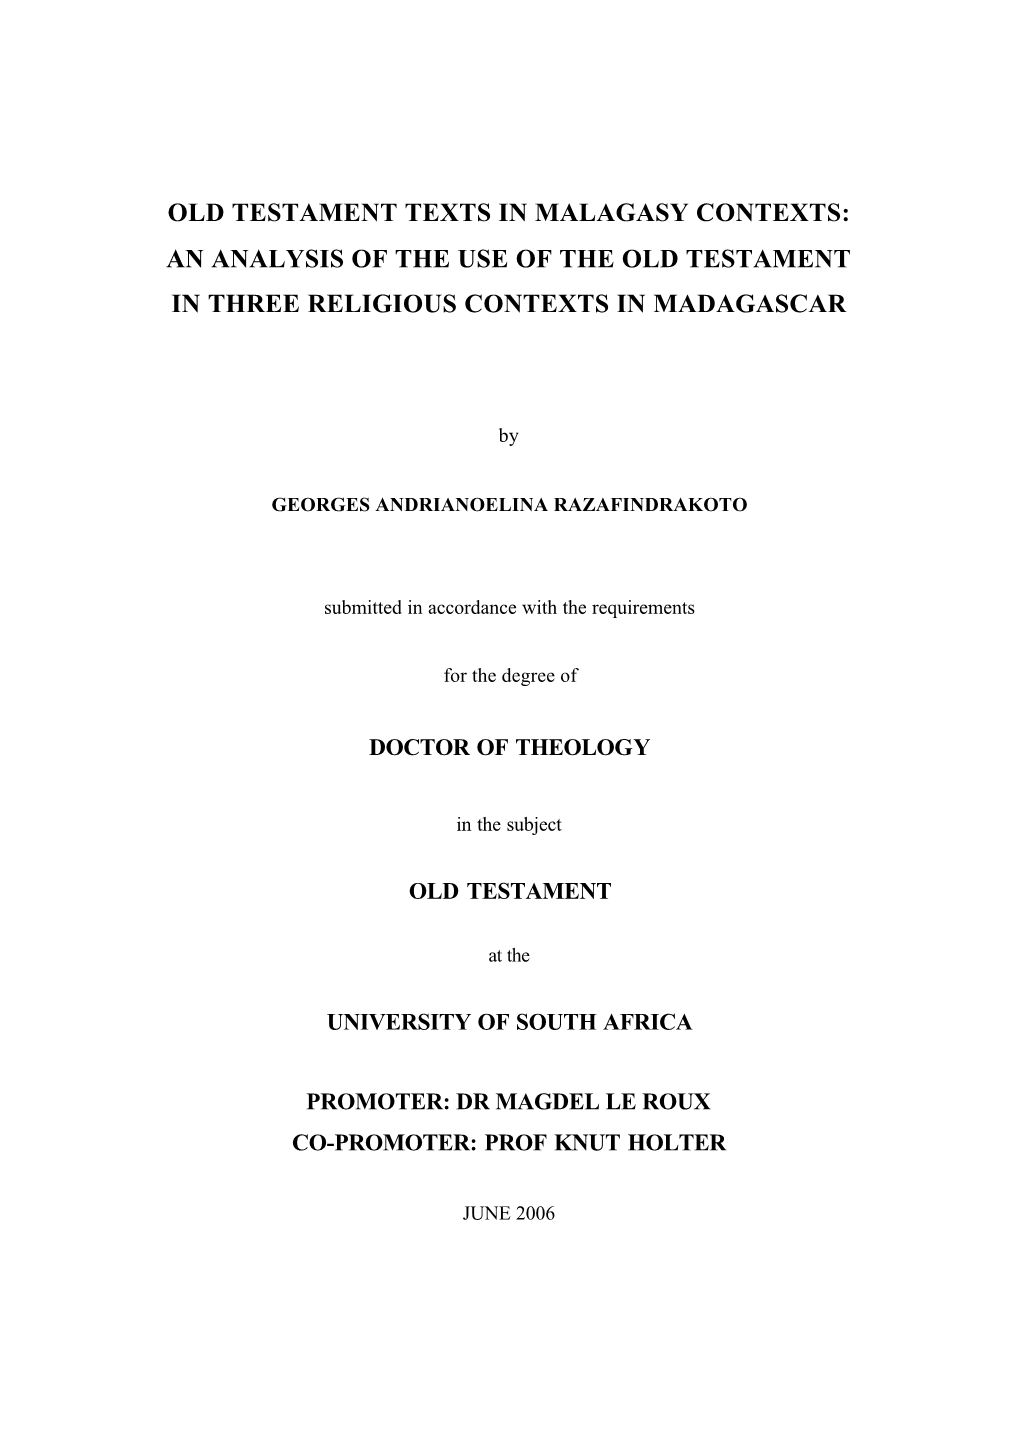 Old Testament Texts in Malagasy Contexts: an Analysis of the Use of the Old Testament in Three Religious Contexts in Madagascar